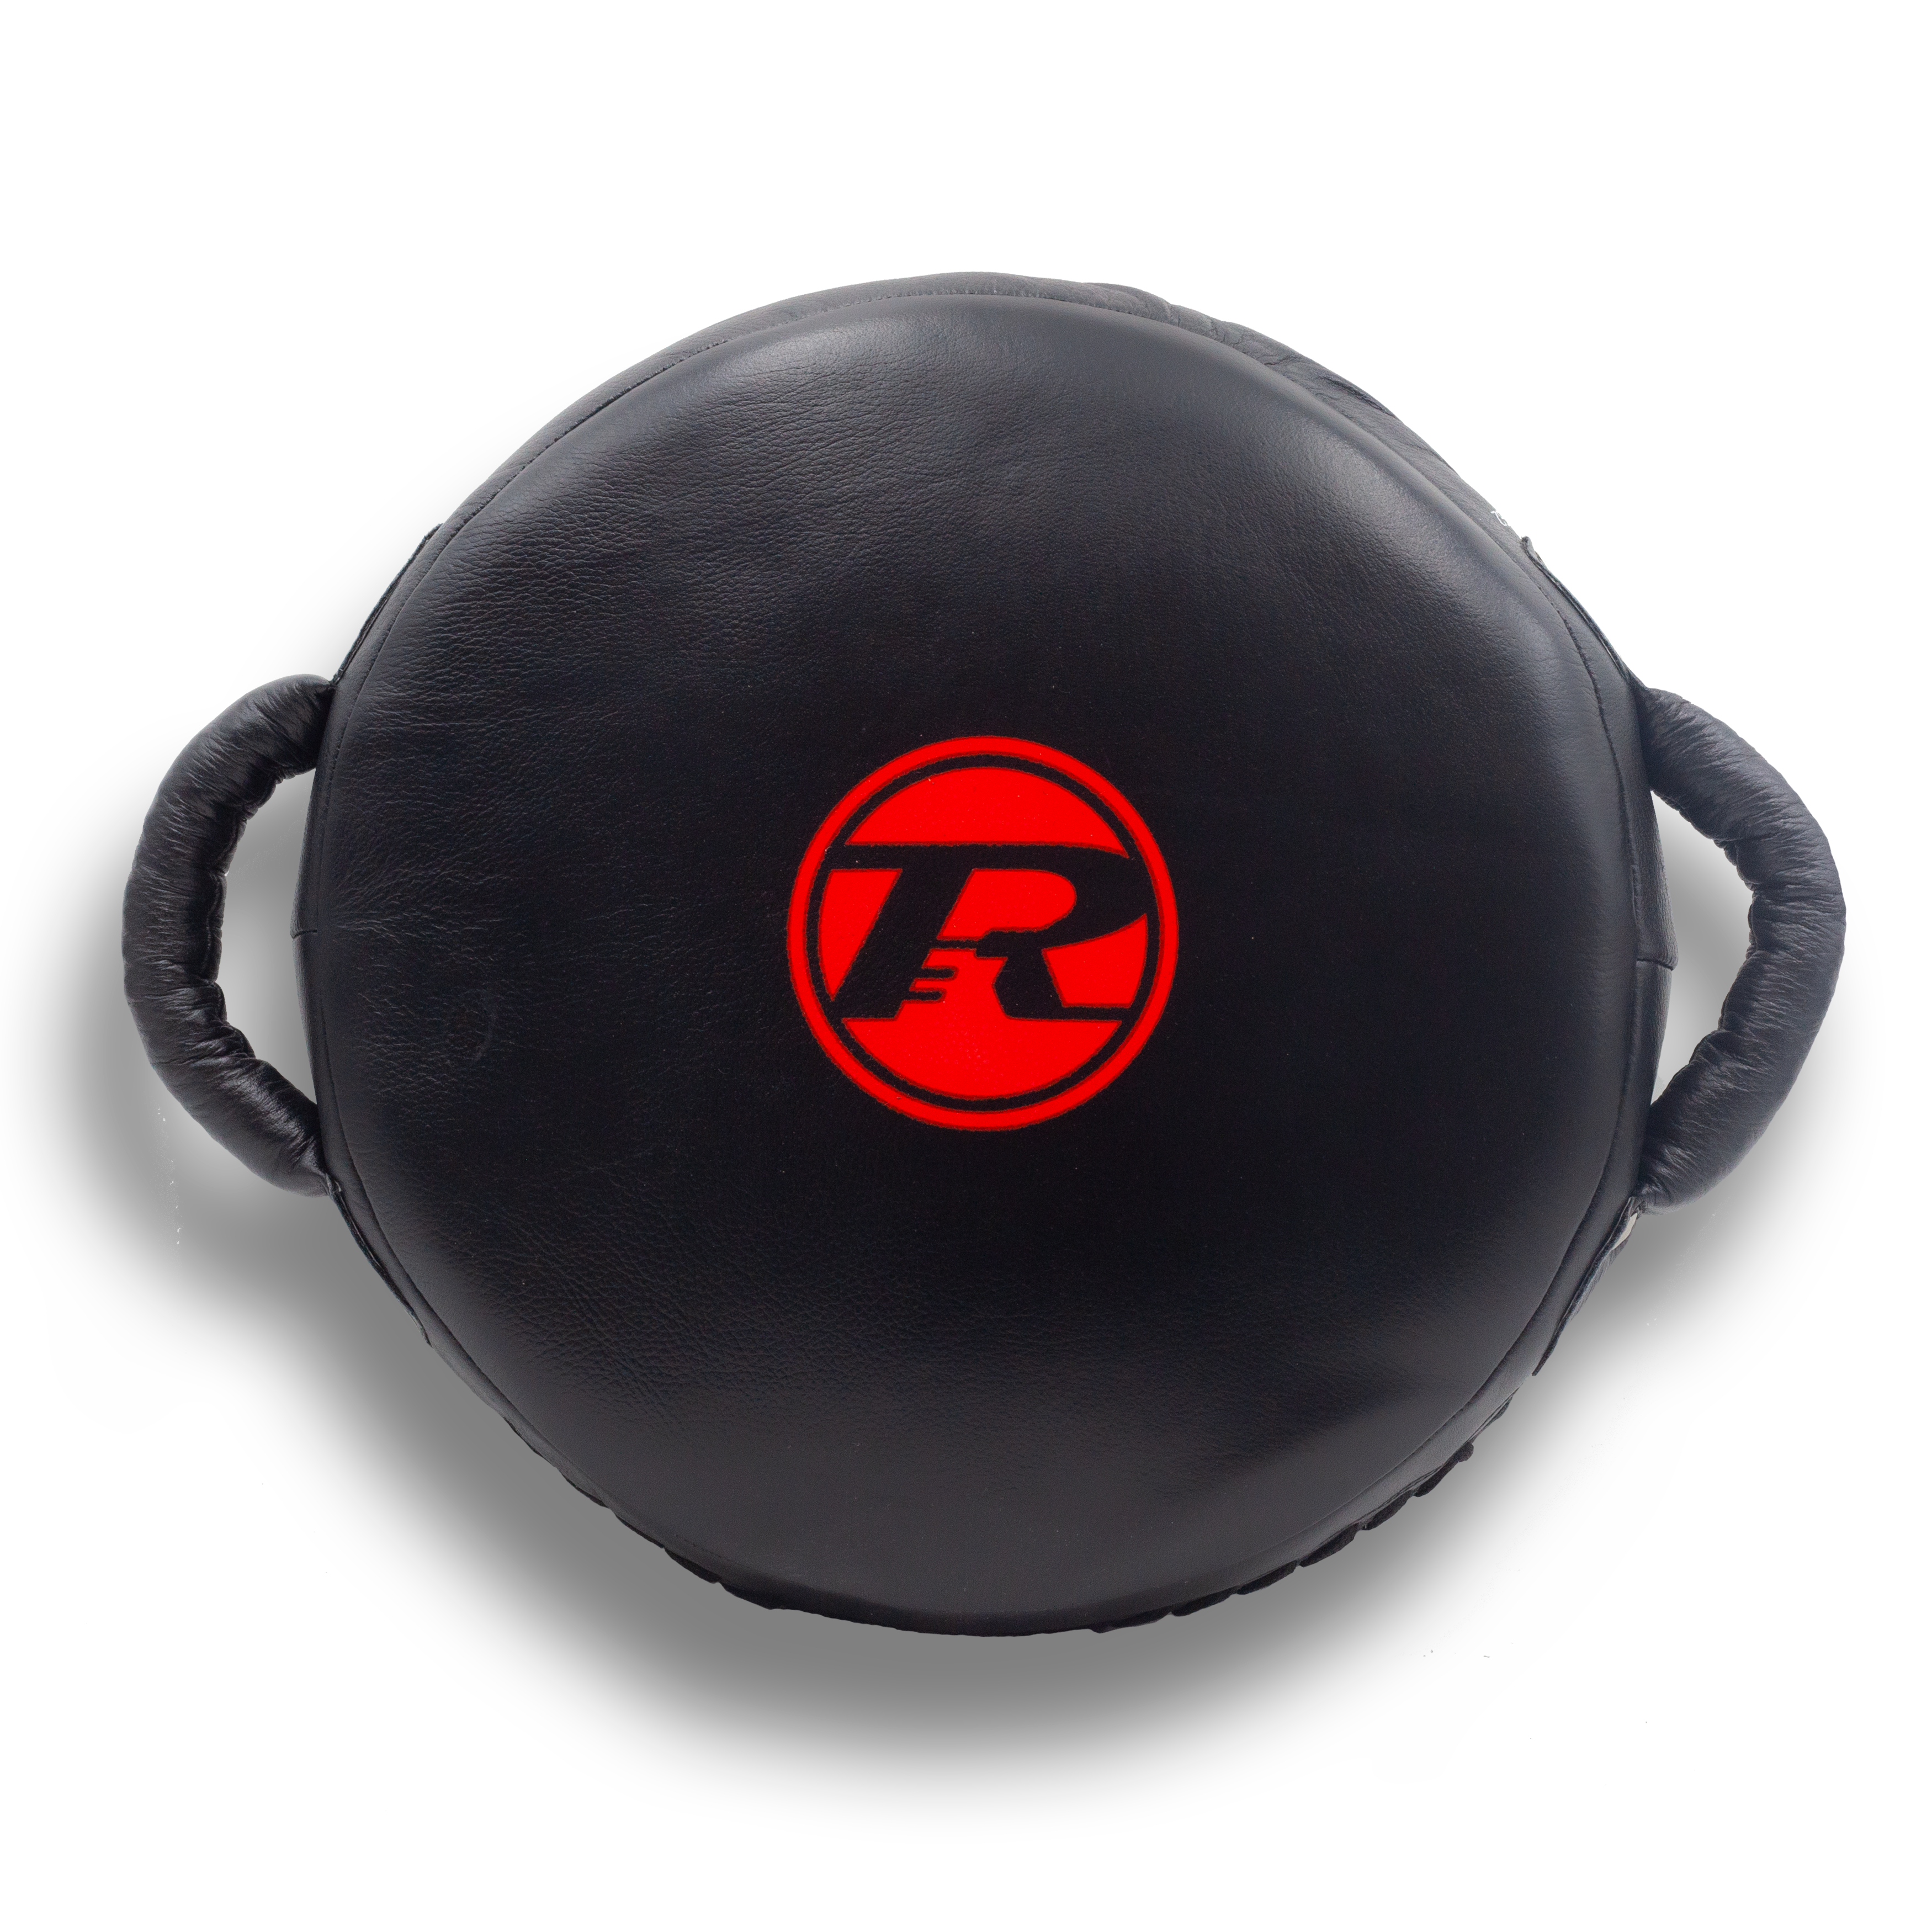 ProTect G2 Leather Circular Punch Pad 14" Black / Red